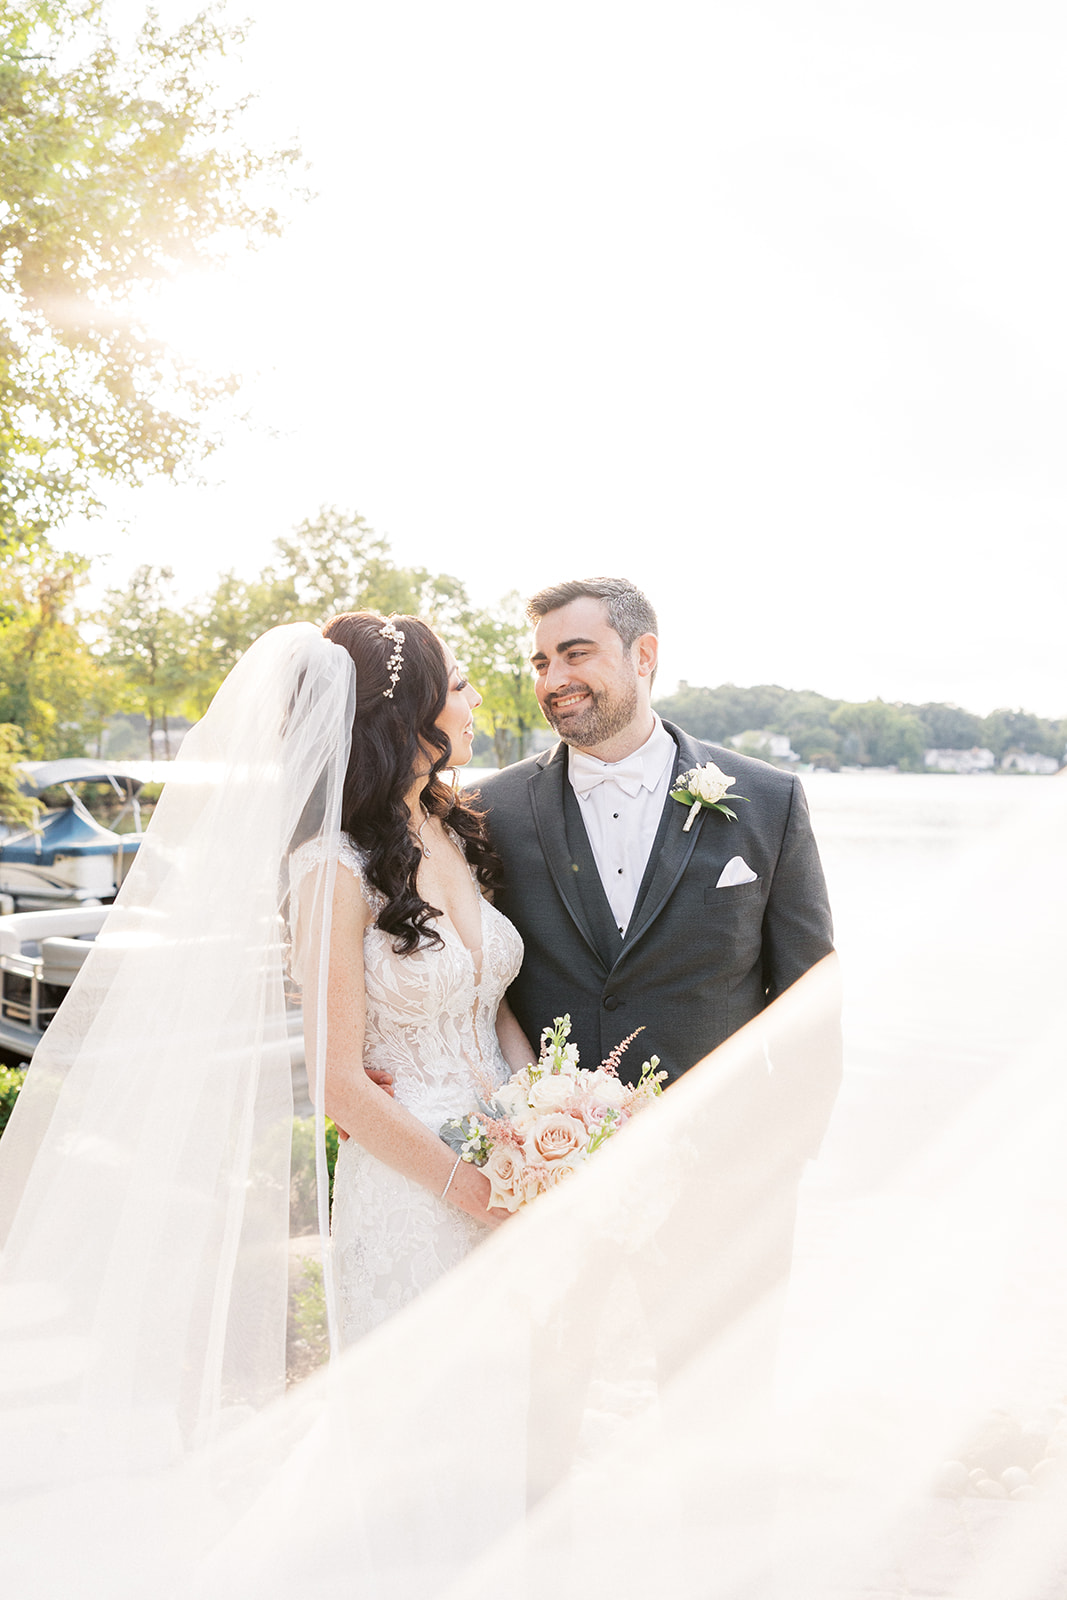 Newlyweds stand together smiling at each other on a waterfront patio while the veil blows around them in the wind